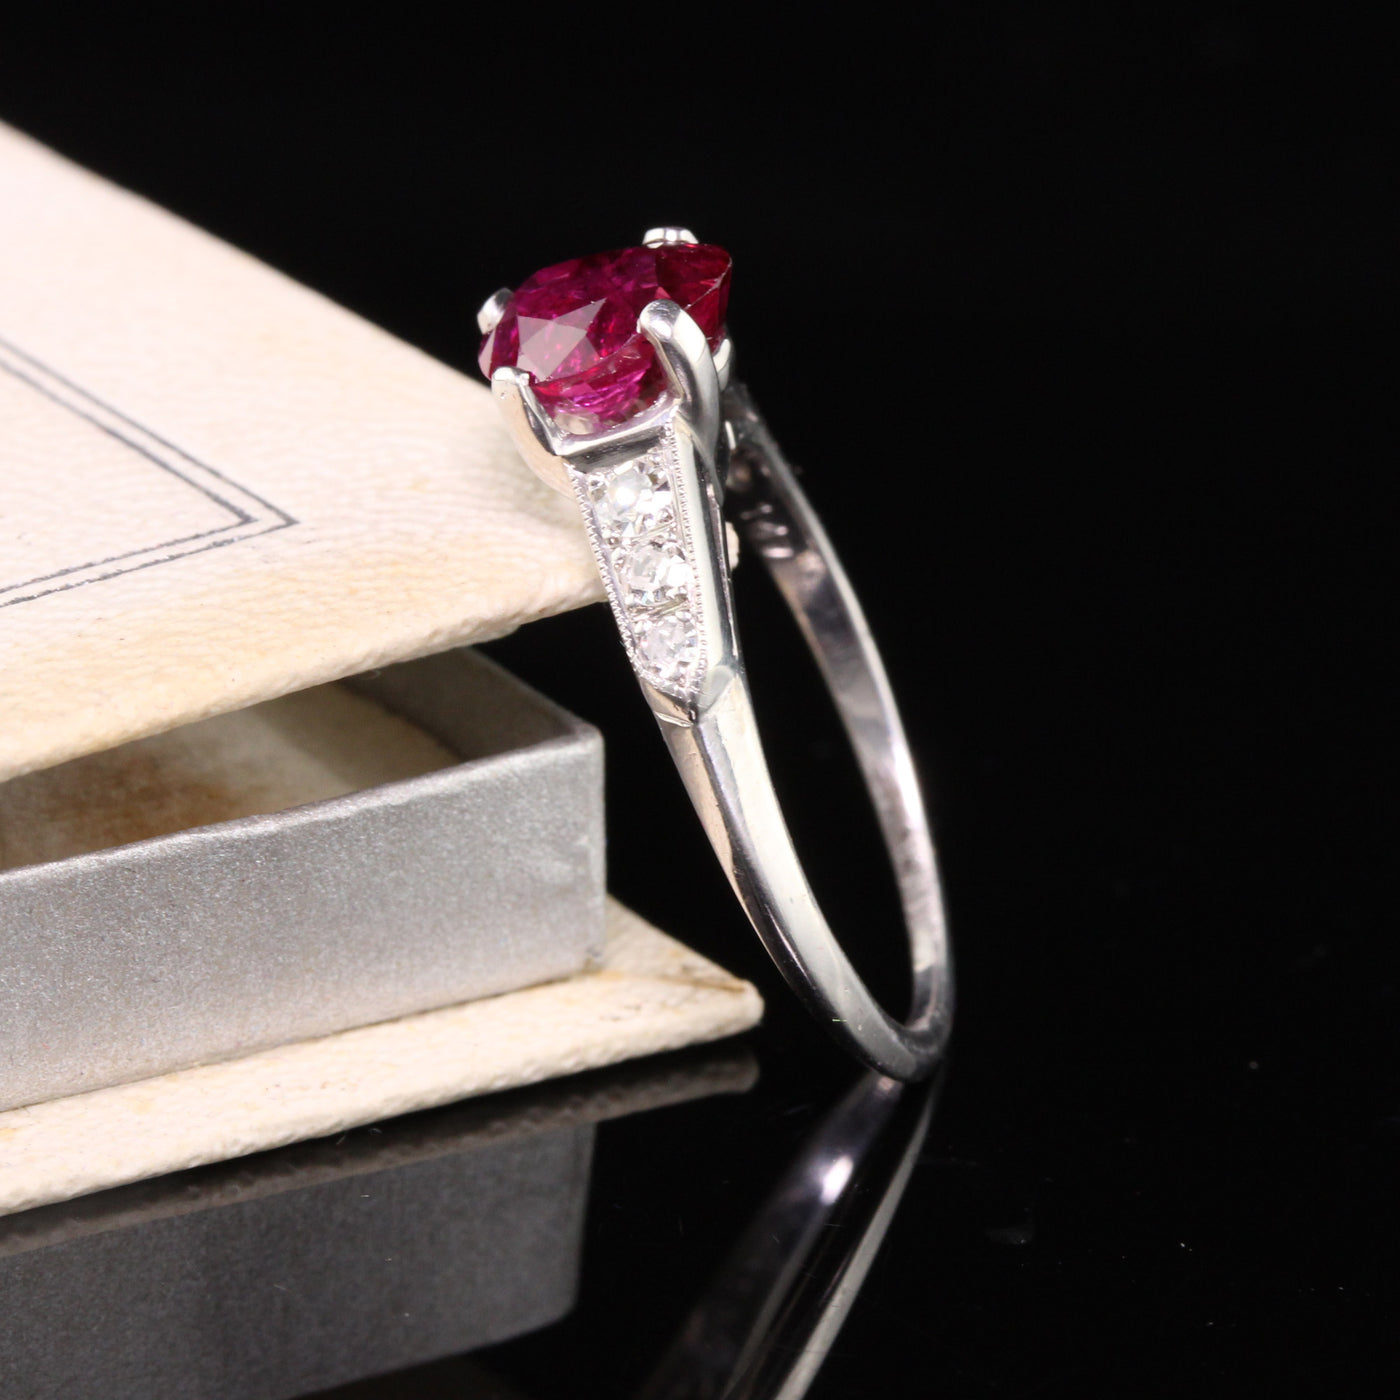 Natural Star Ruby Ring One Carat Star Ruby Platinum Diamond Halo Cabochon  Cut Ruby. New never worn ring